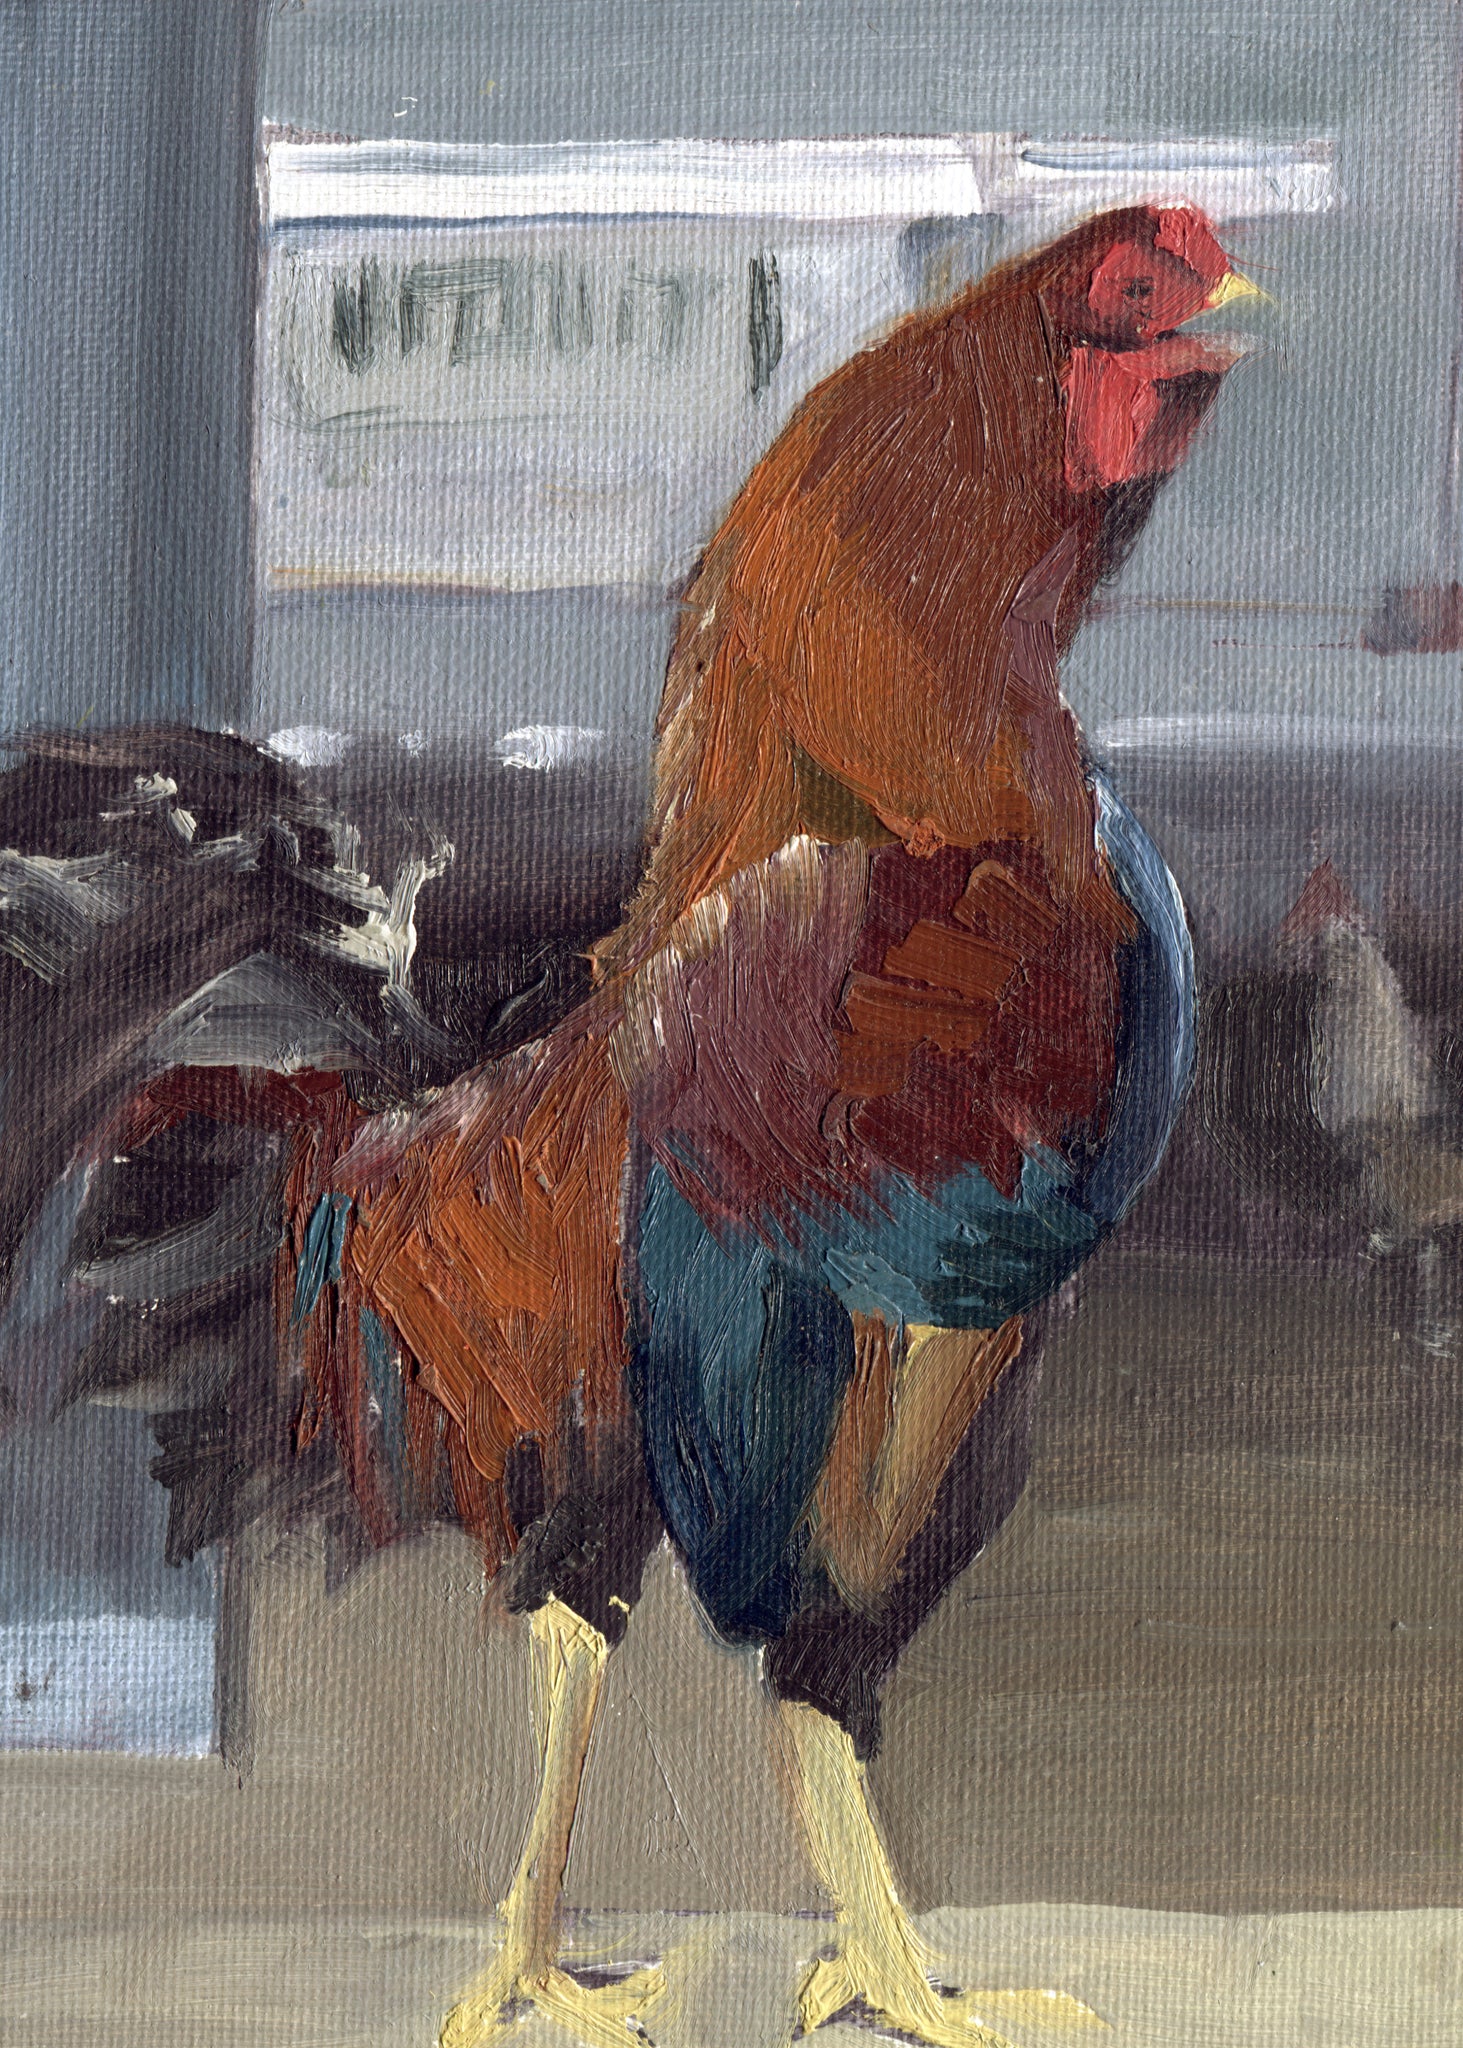 Parking Lot Rooster, 2012